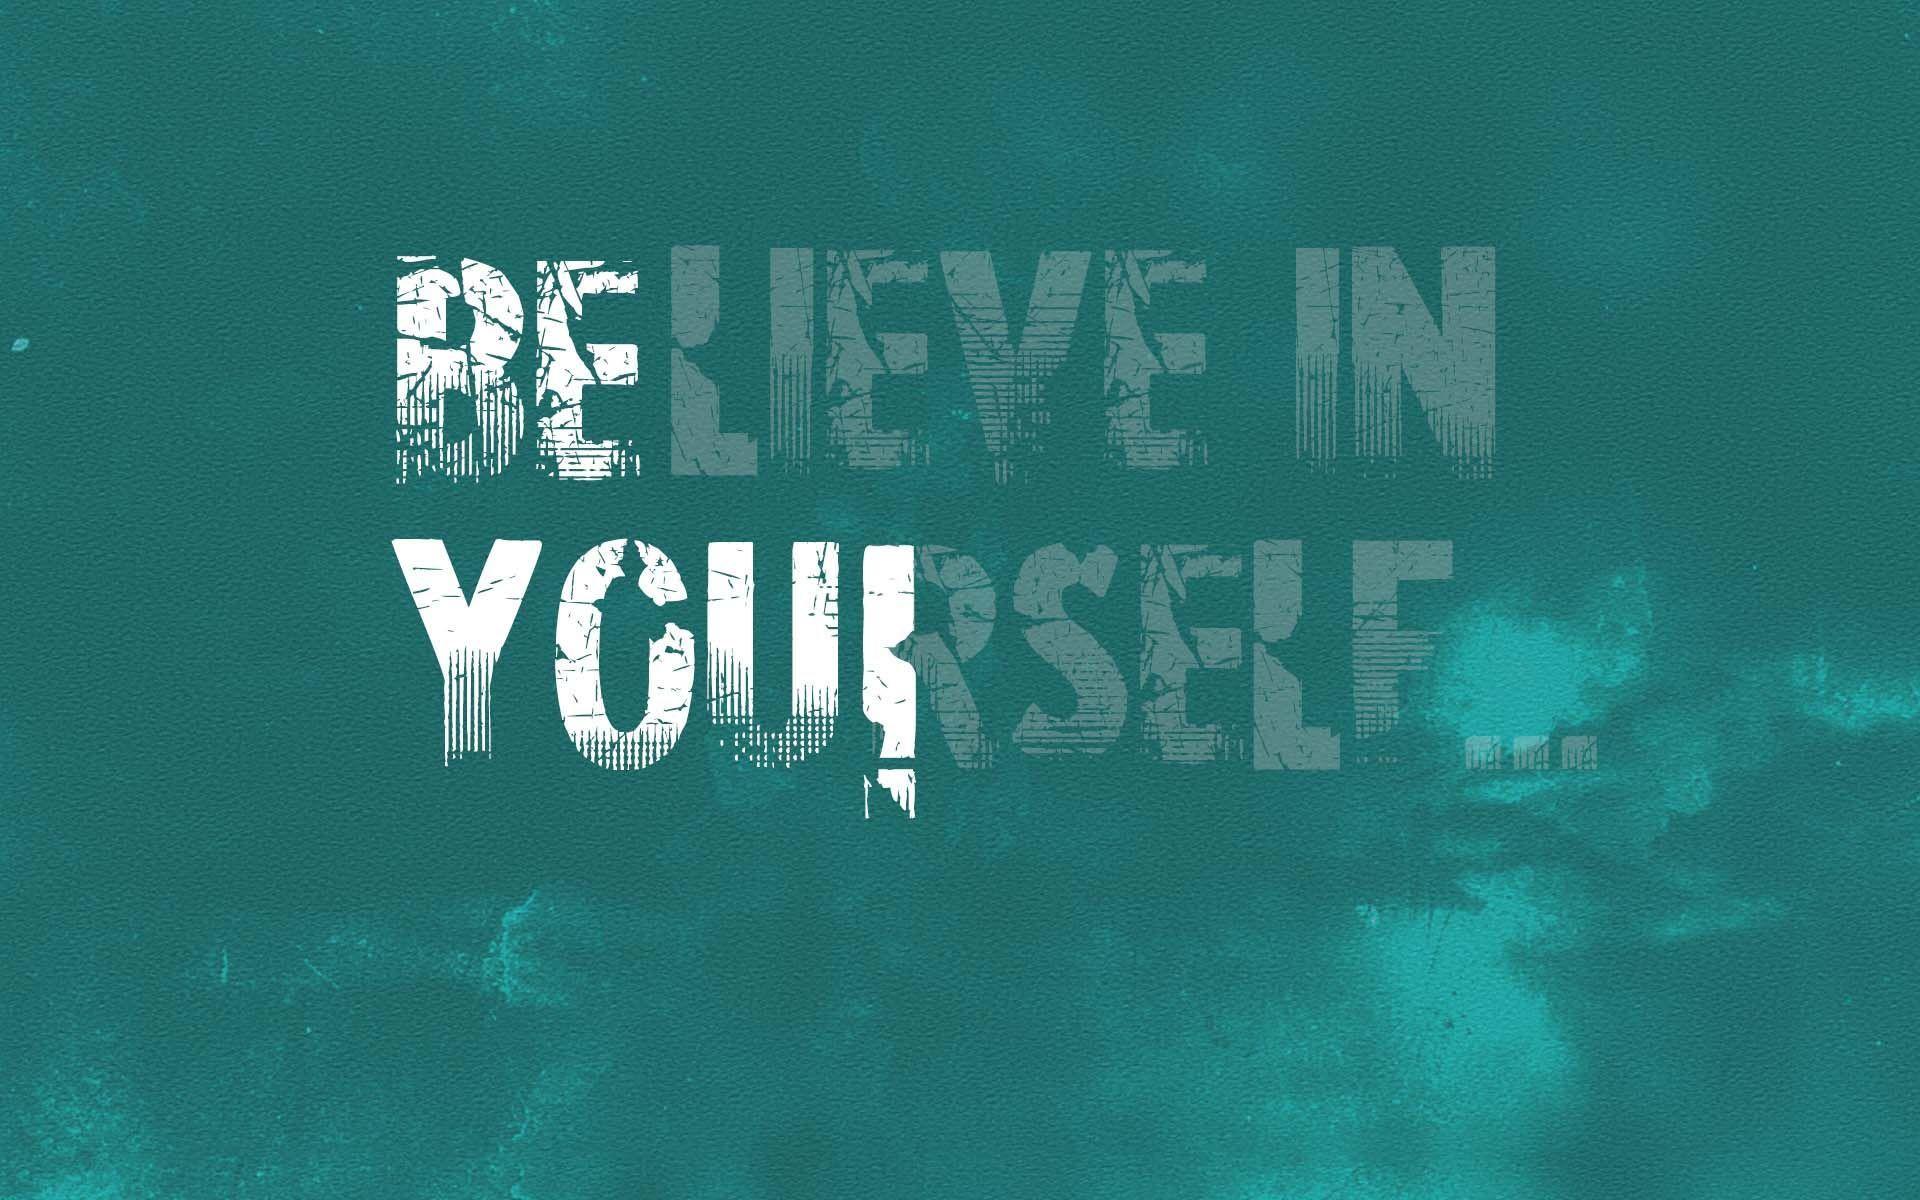 Believe In Yourself. HD Motivation Wallpaper for Mobile